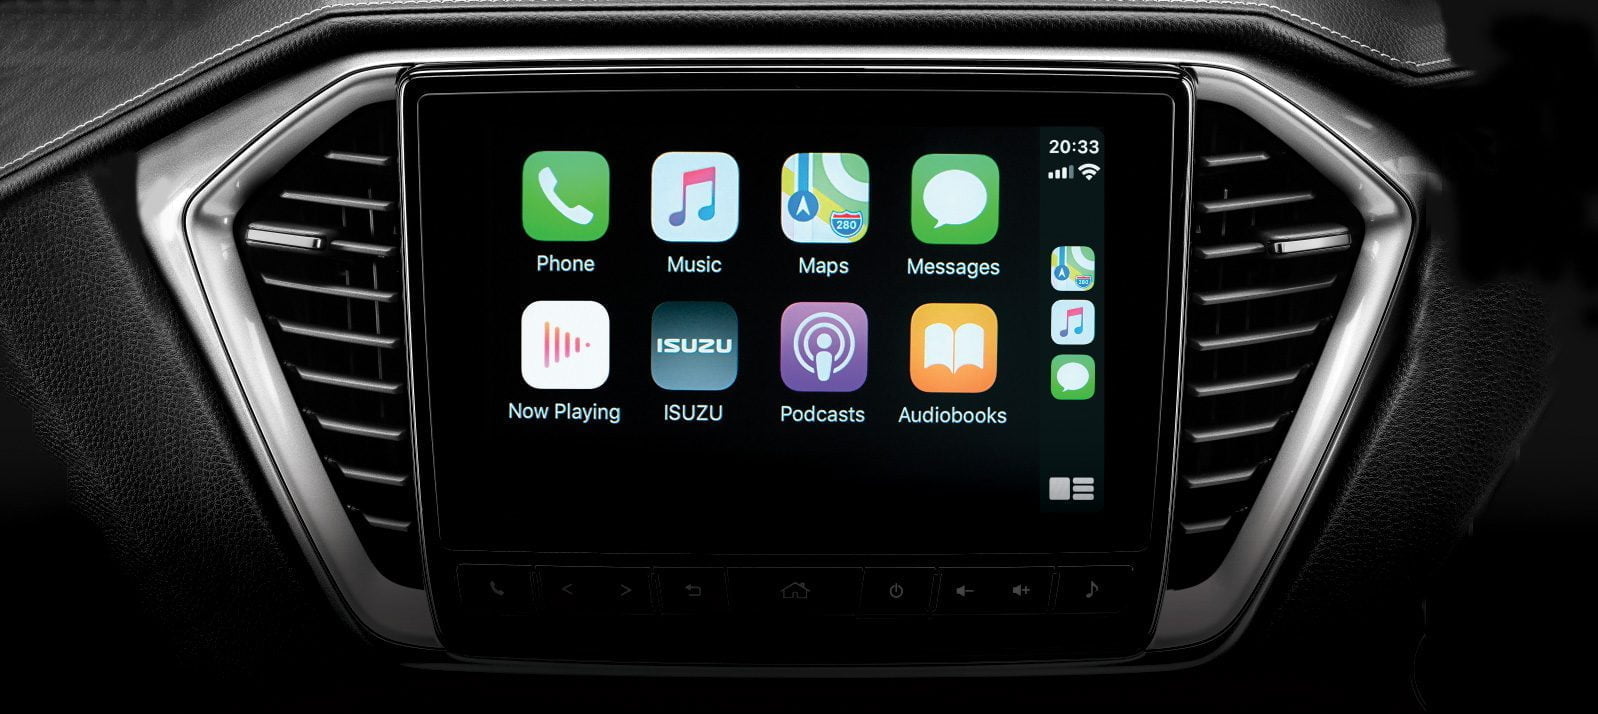 9 inch Touch Screen Infotainment System with Apple CarPlay and Android Auto Connectivity